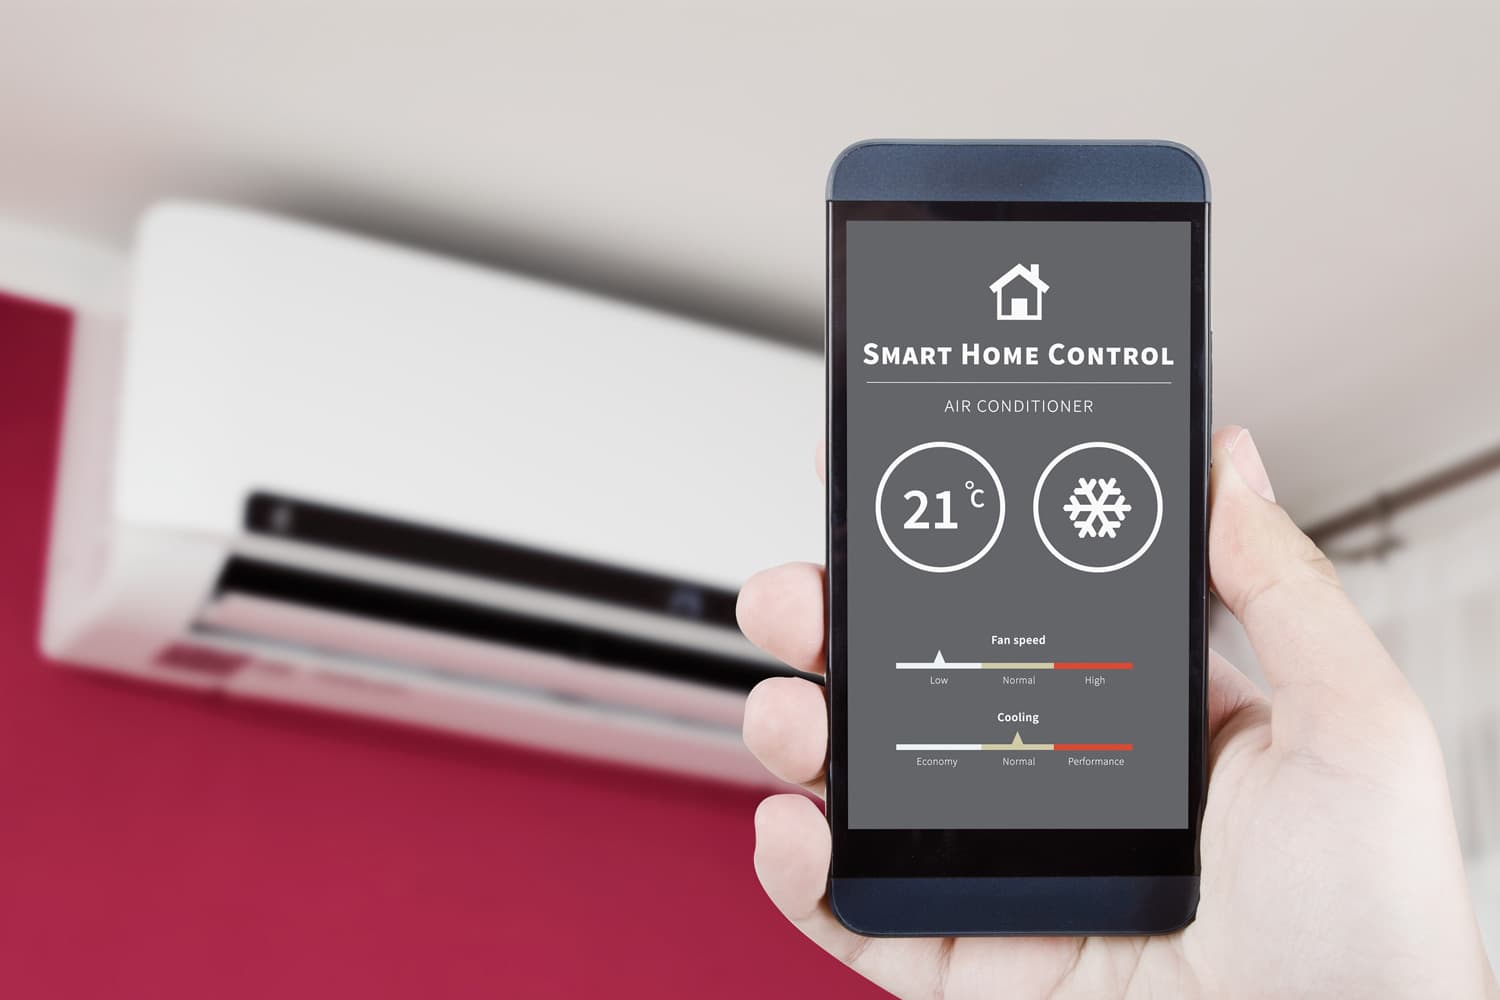 Air conditioner remote control with smart home system on digital device.